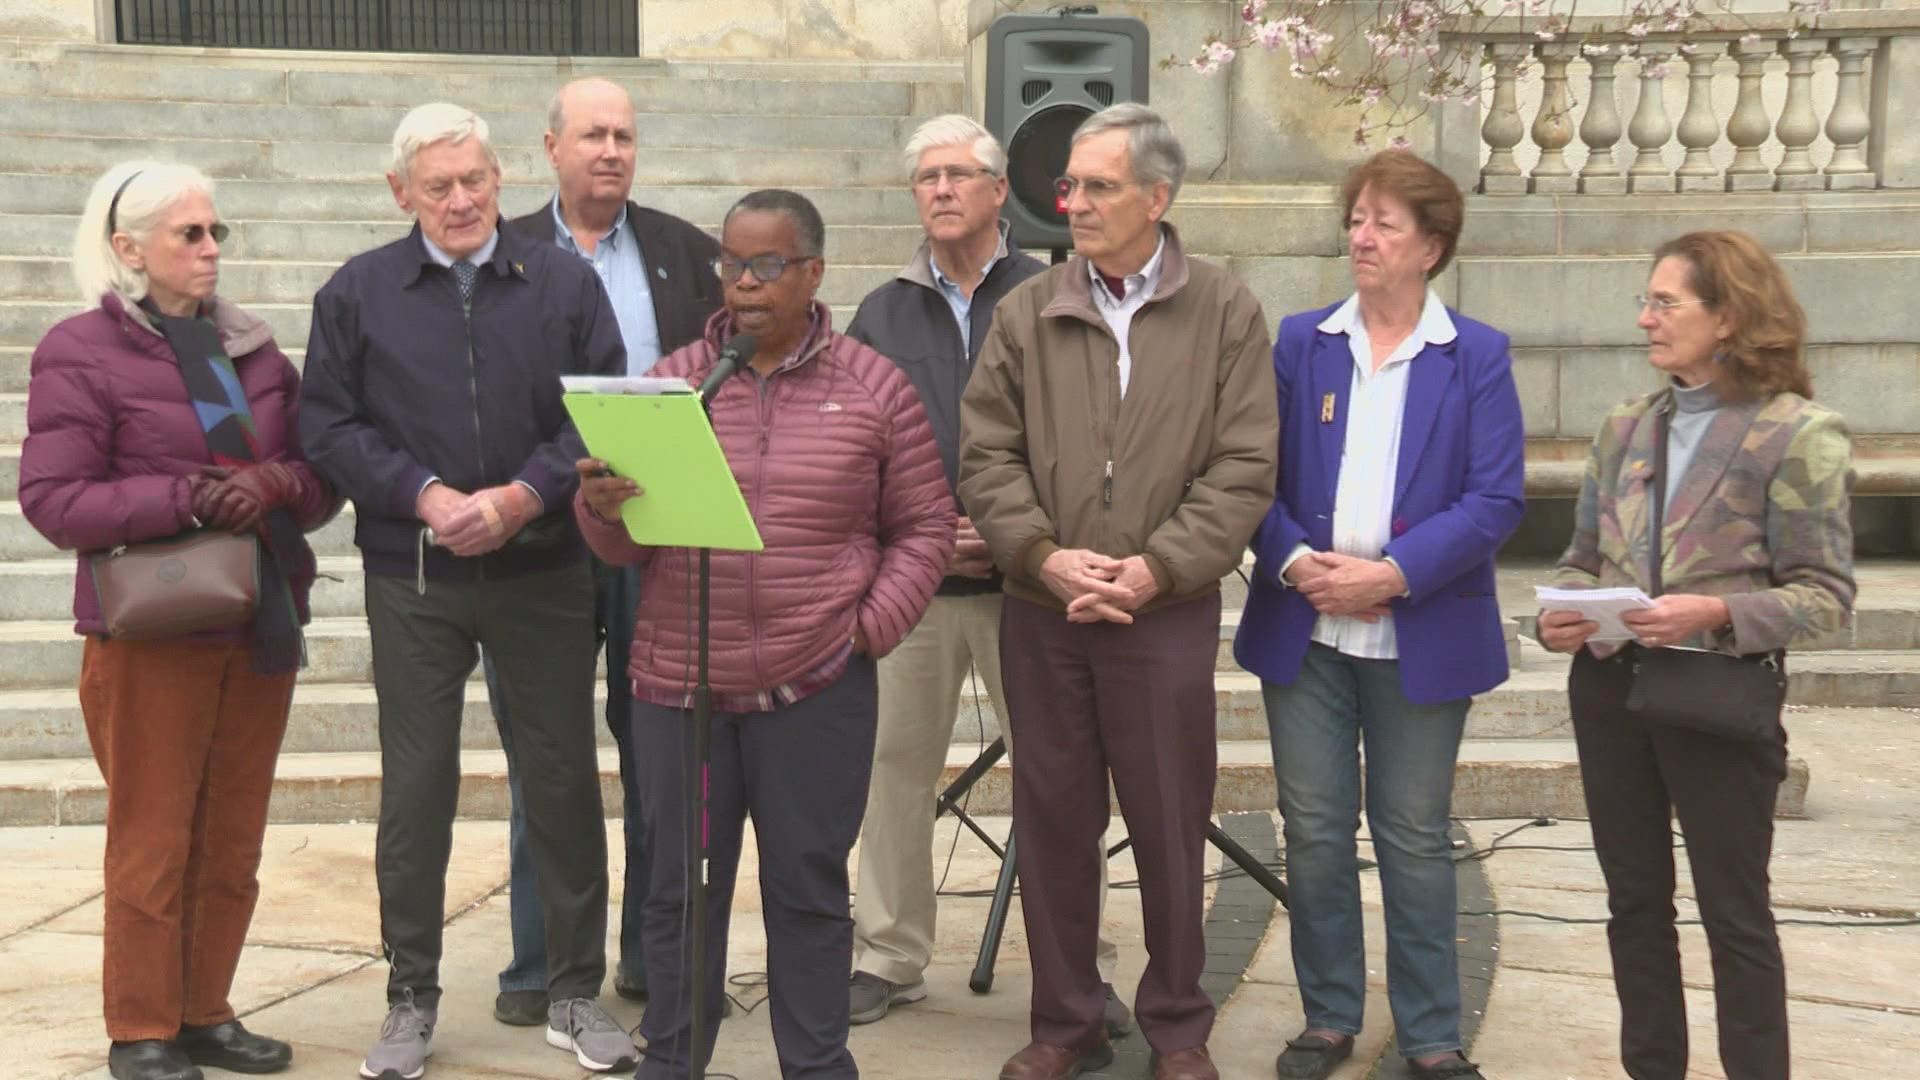 A group of former Portland mayors gathered outside city hall, calling on the charter commission to not ratify its proposed governance model.